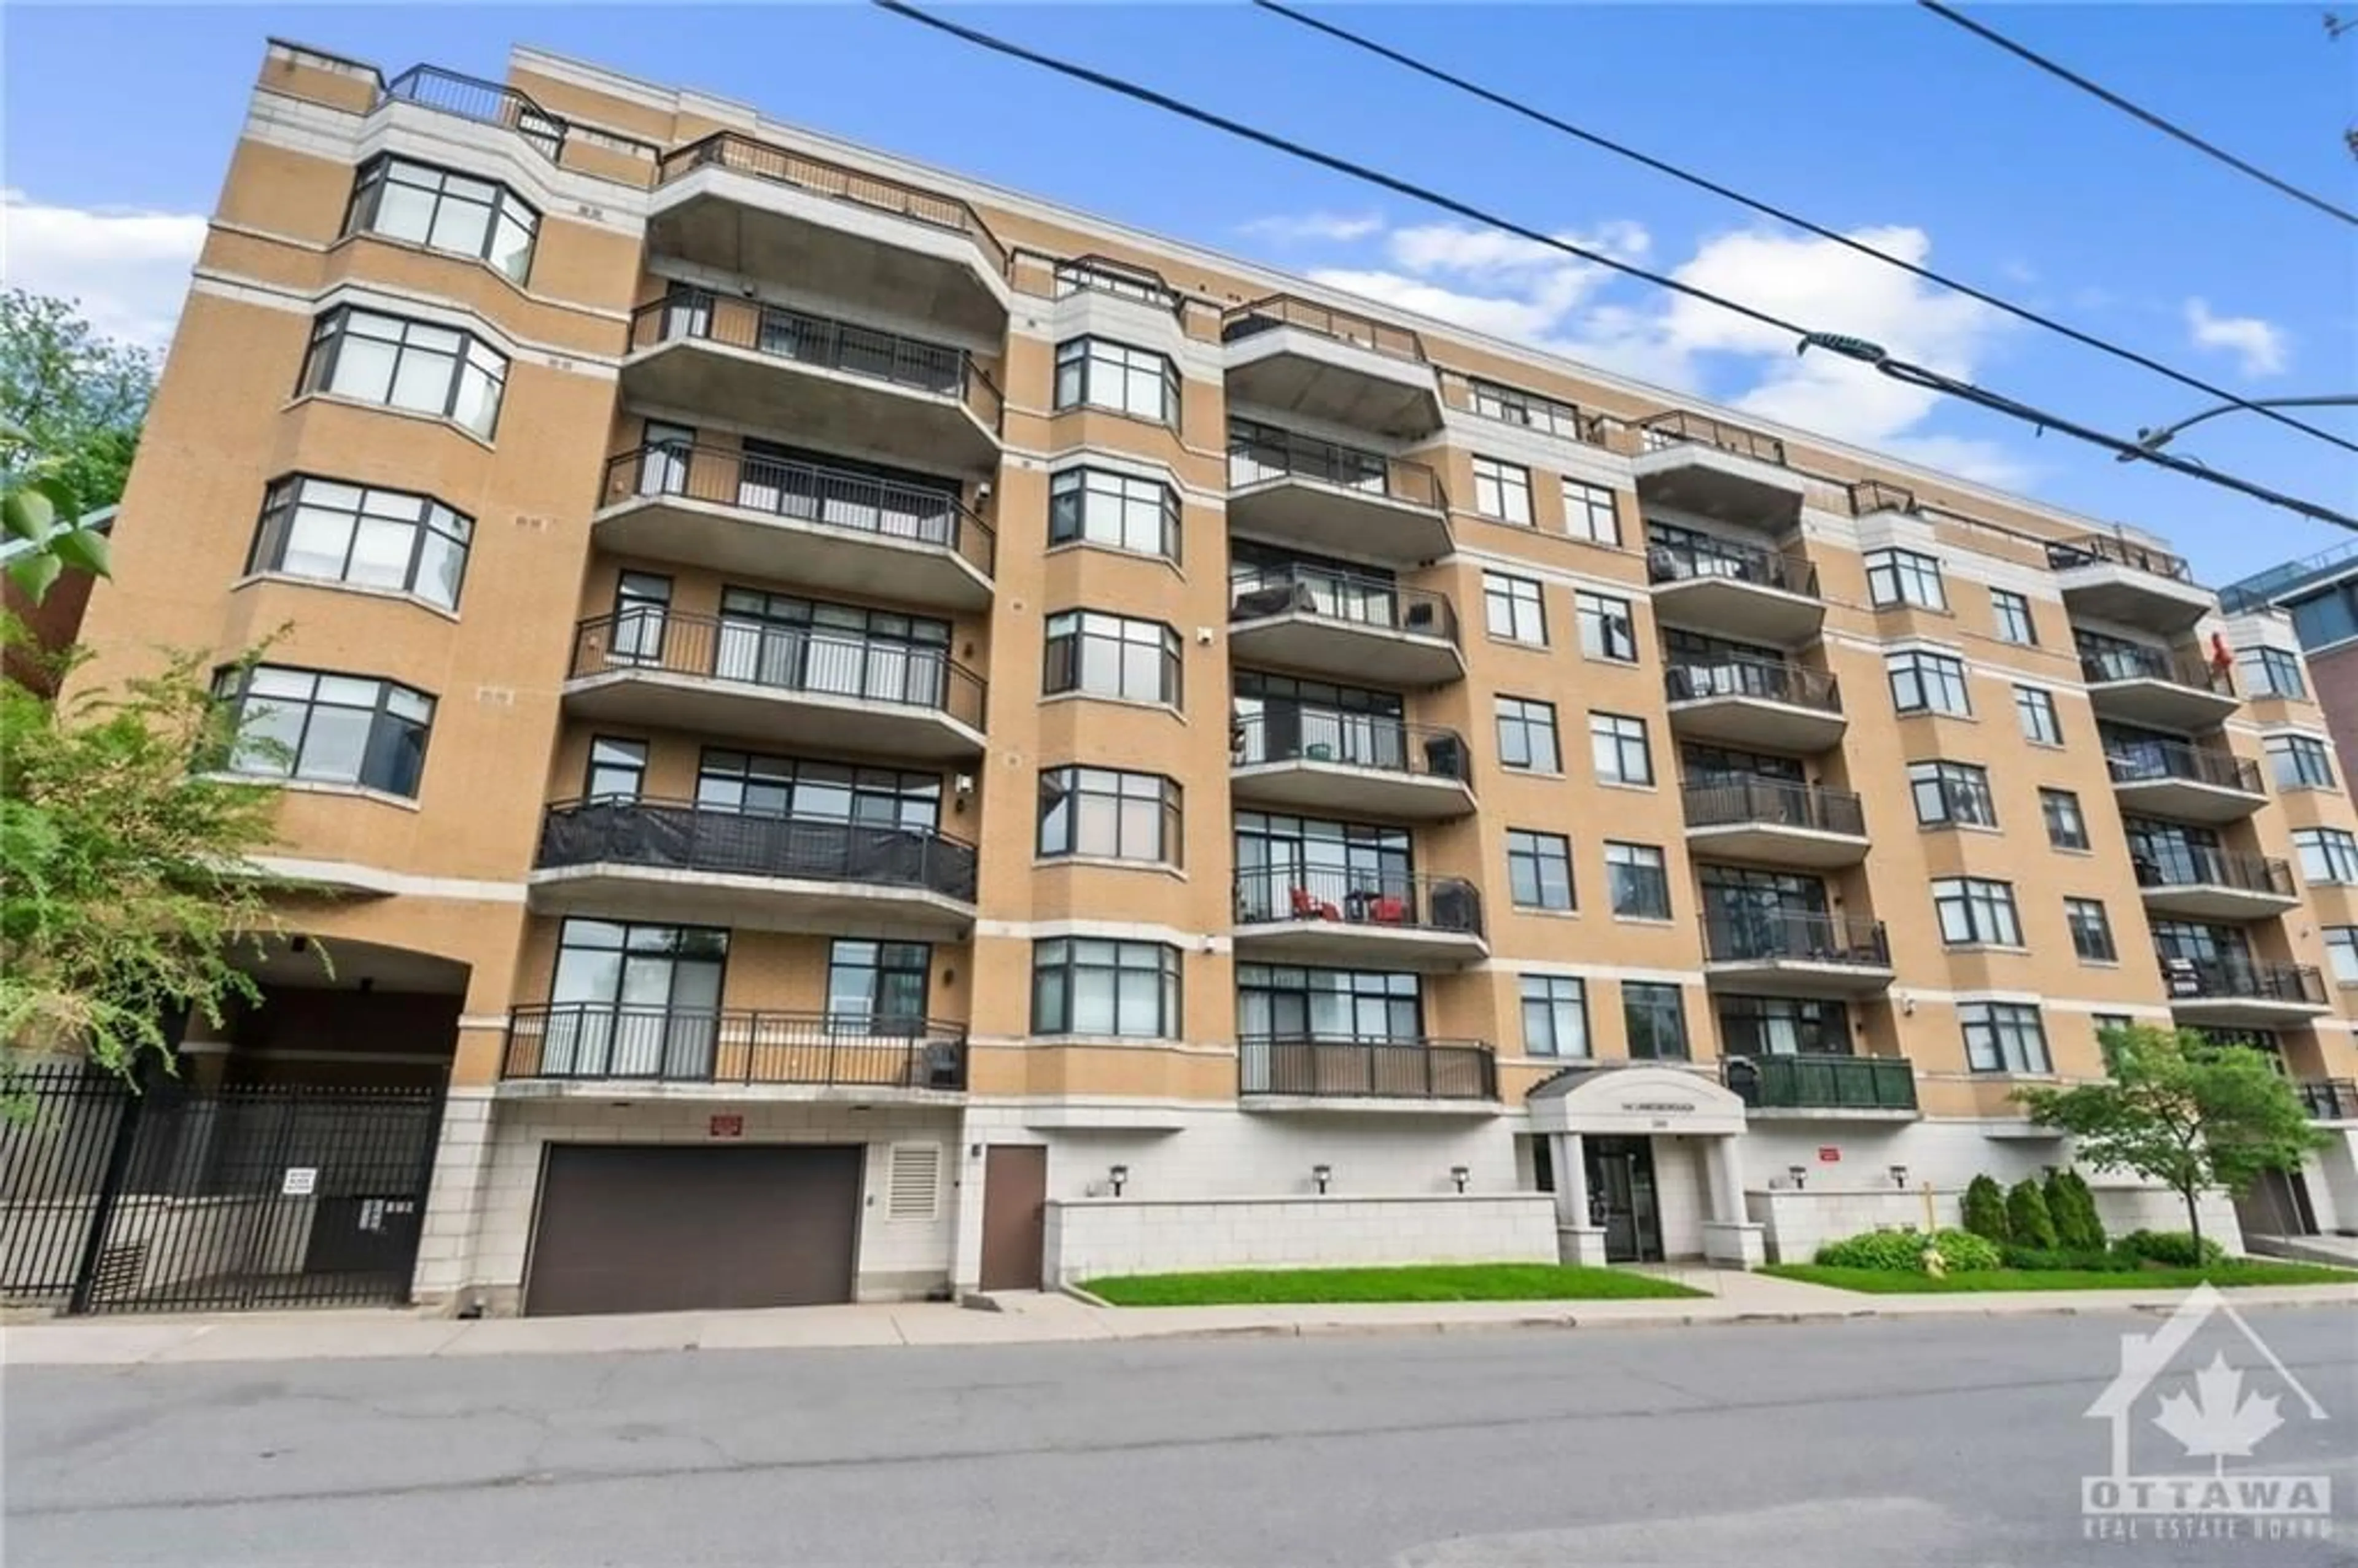 A pic from exterior of the house or condo for 260 BESSERER St #209, Ottawa Ontario K1N 1J3